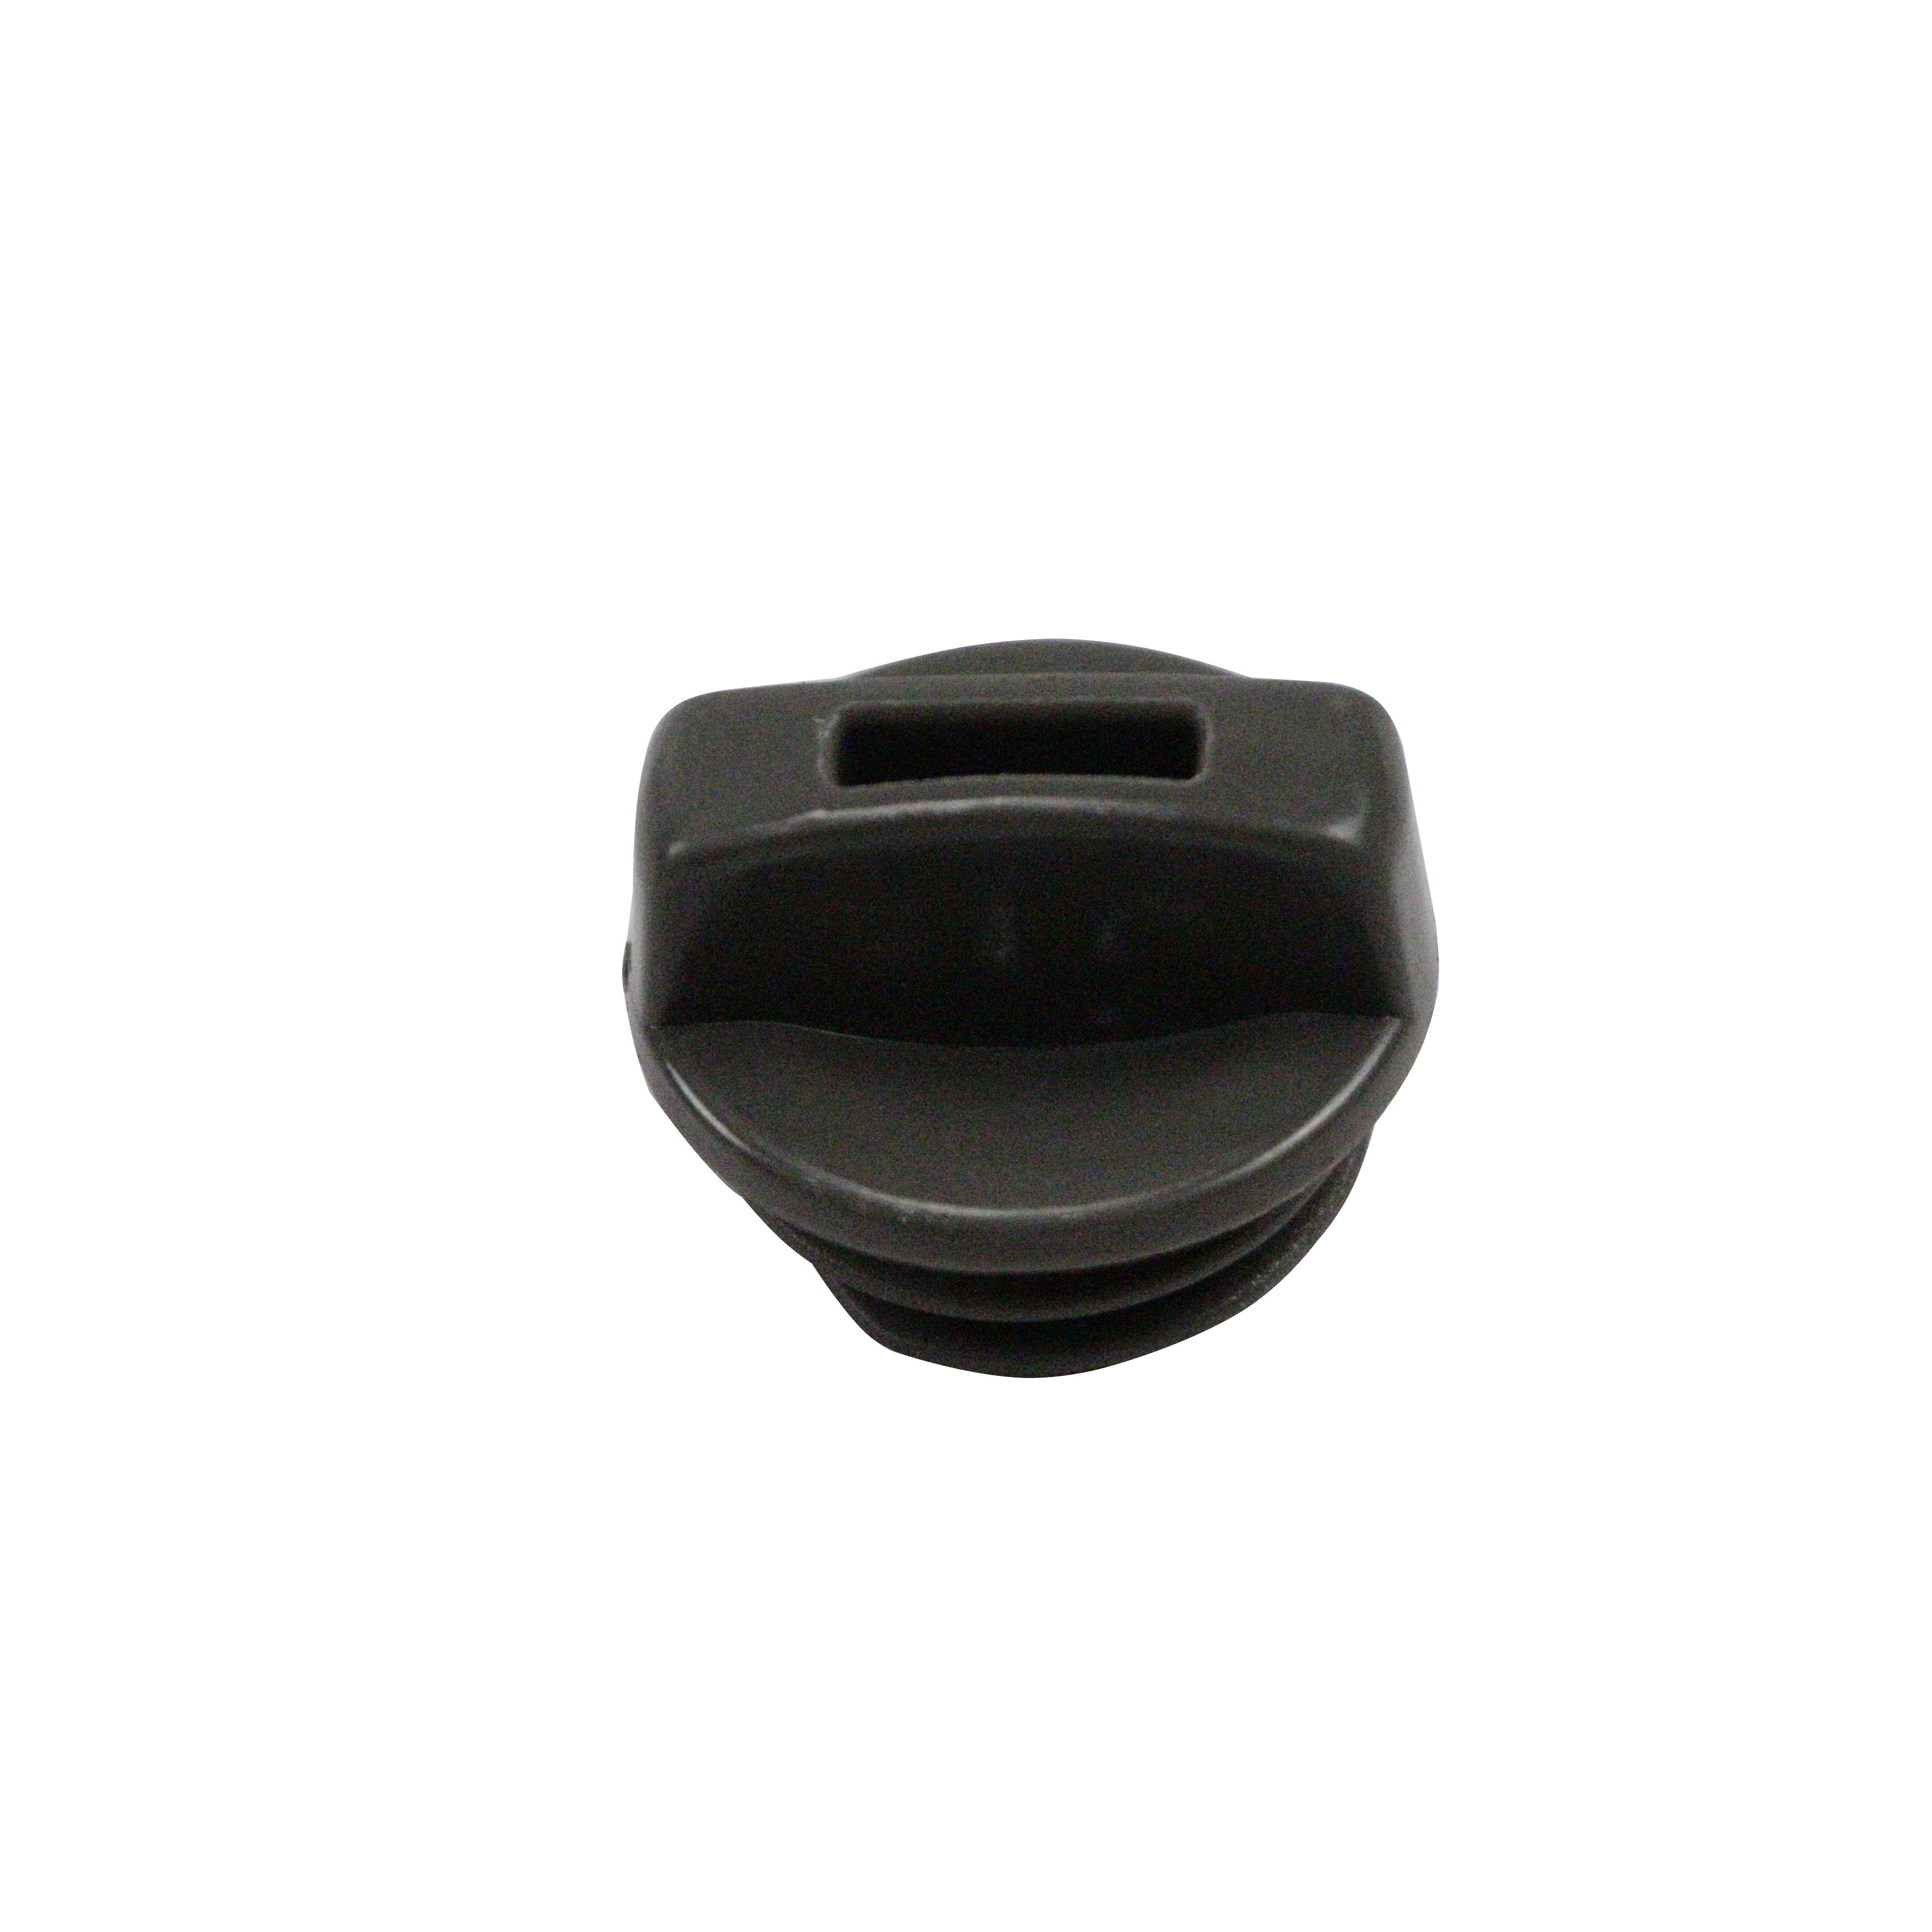 Fuel Cap For Joncutter G4500 G5800 Chainsaw